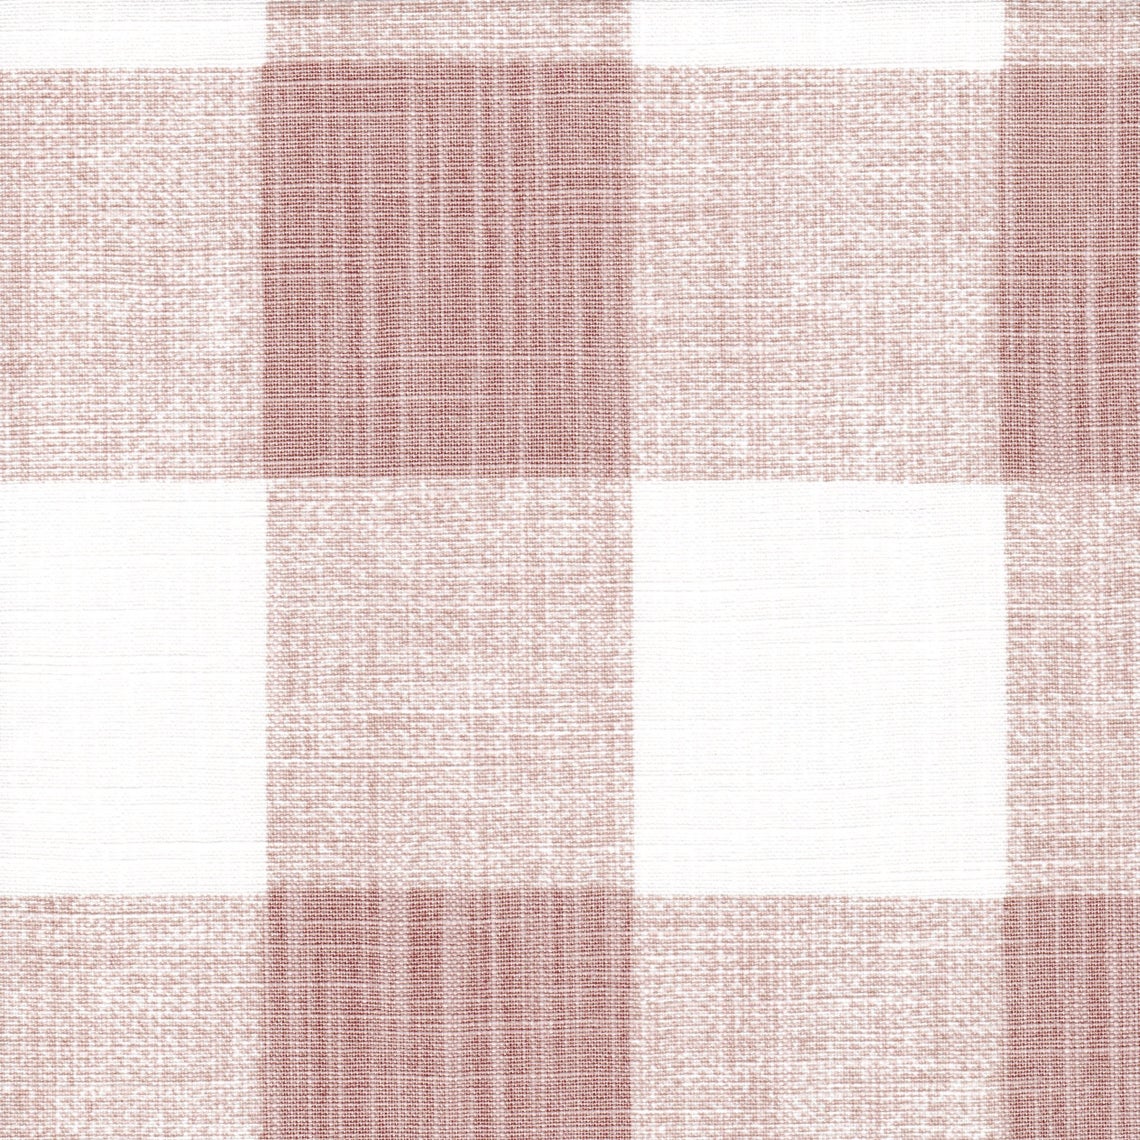 gathered bedskirt in anderson blush buffalo check plaid